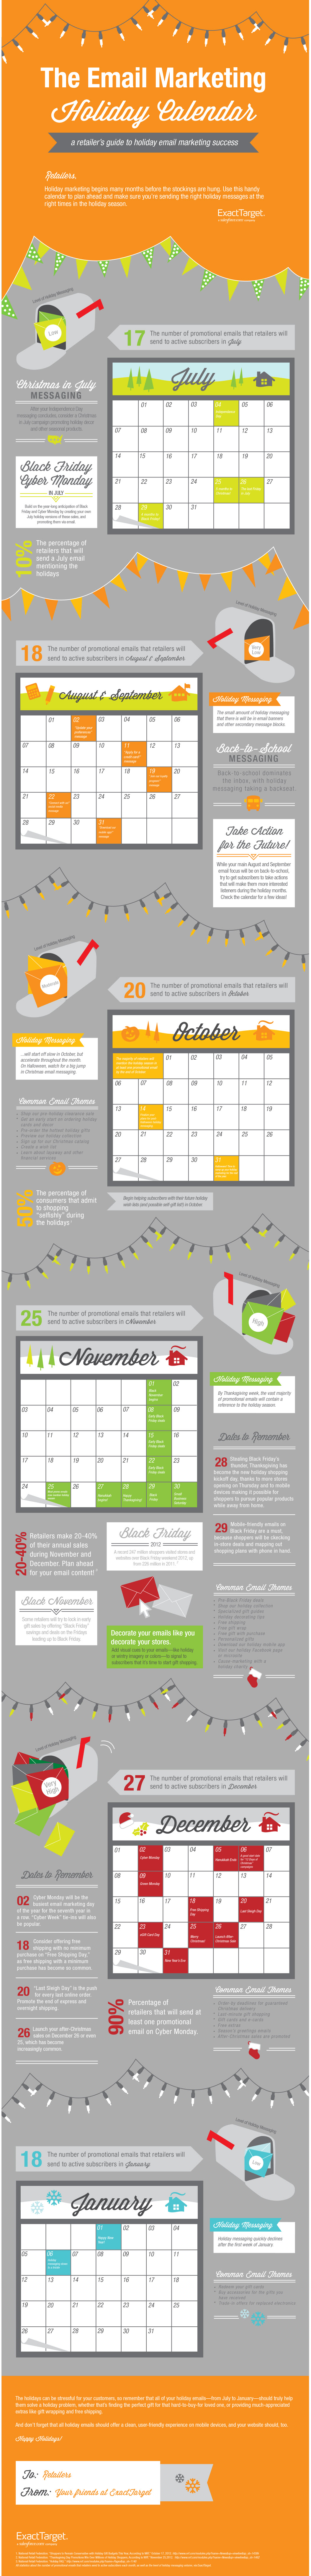 Email Marketing Holiday Calendar Infographic